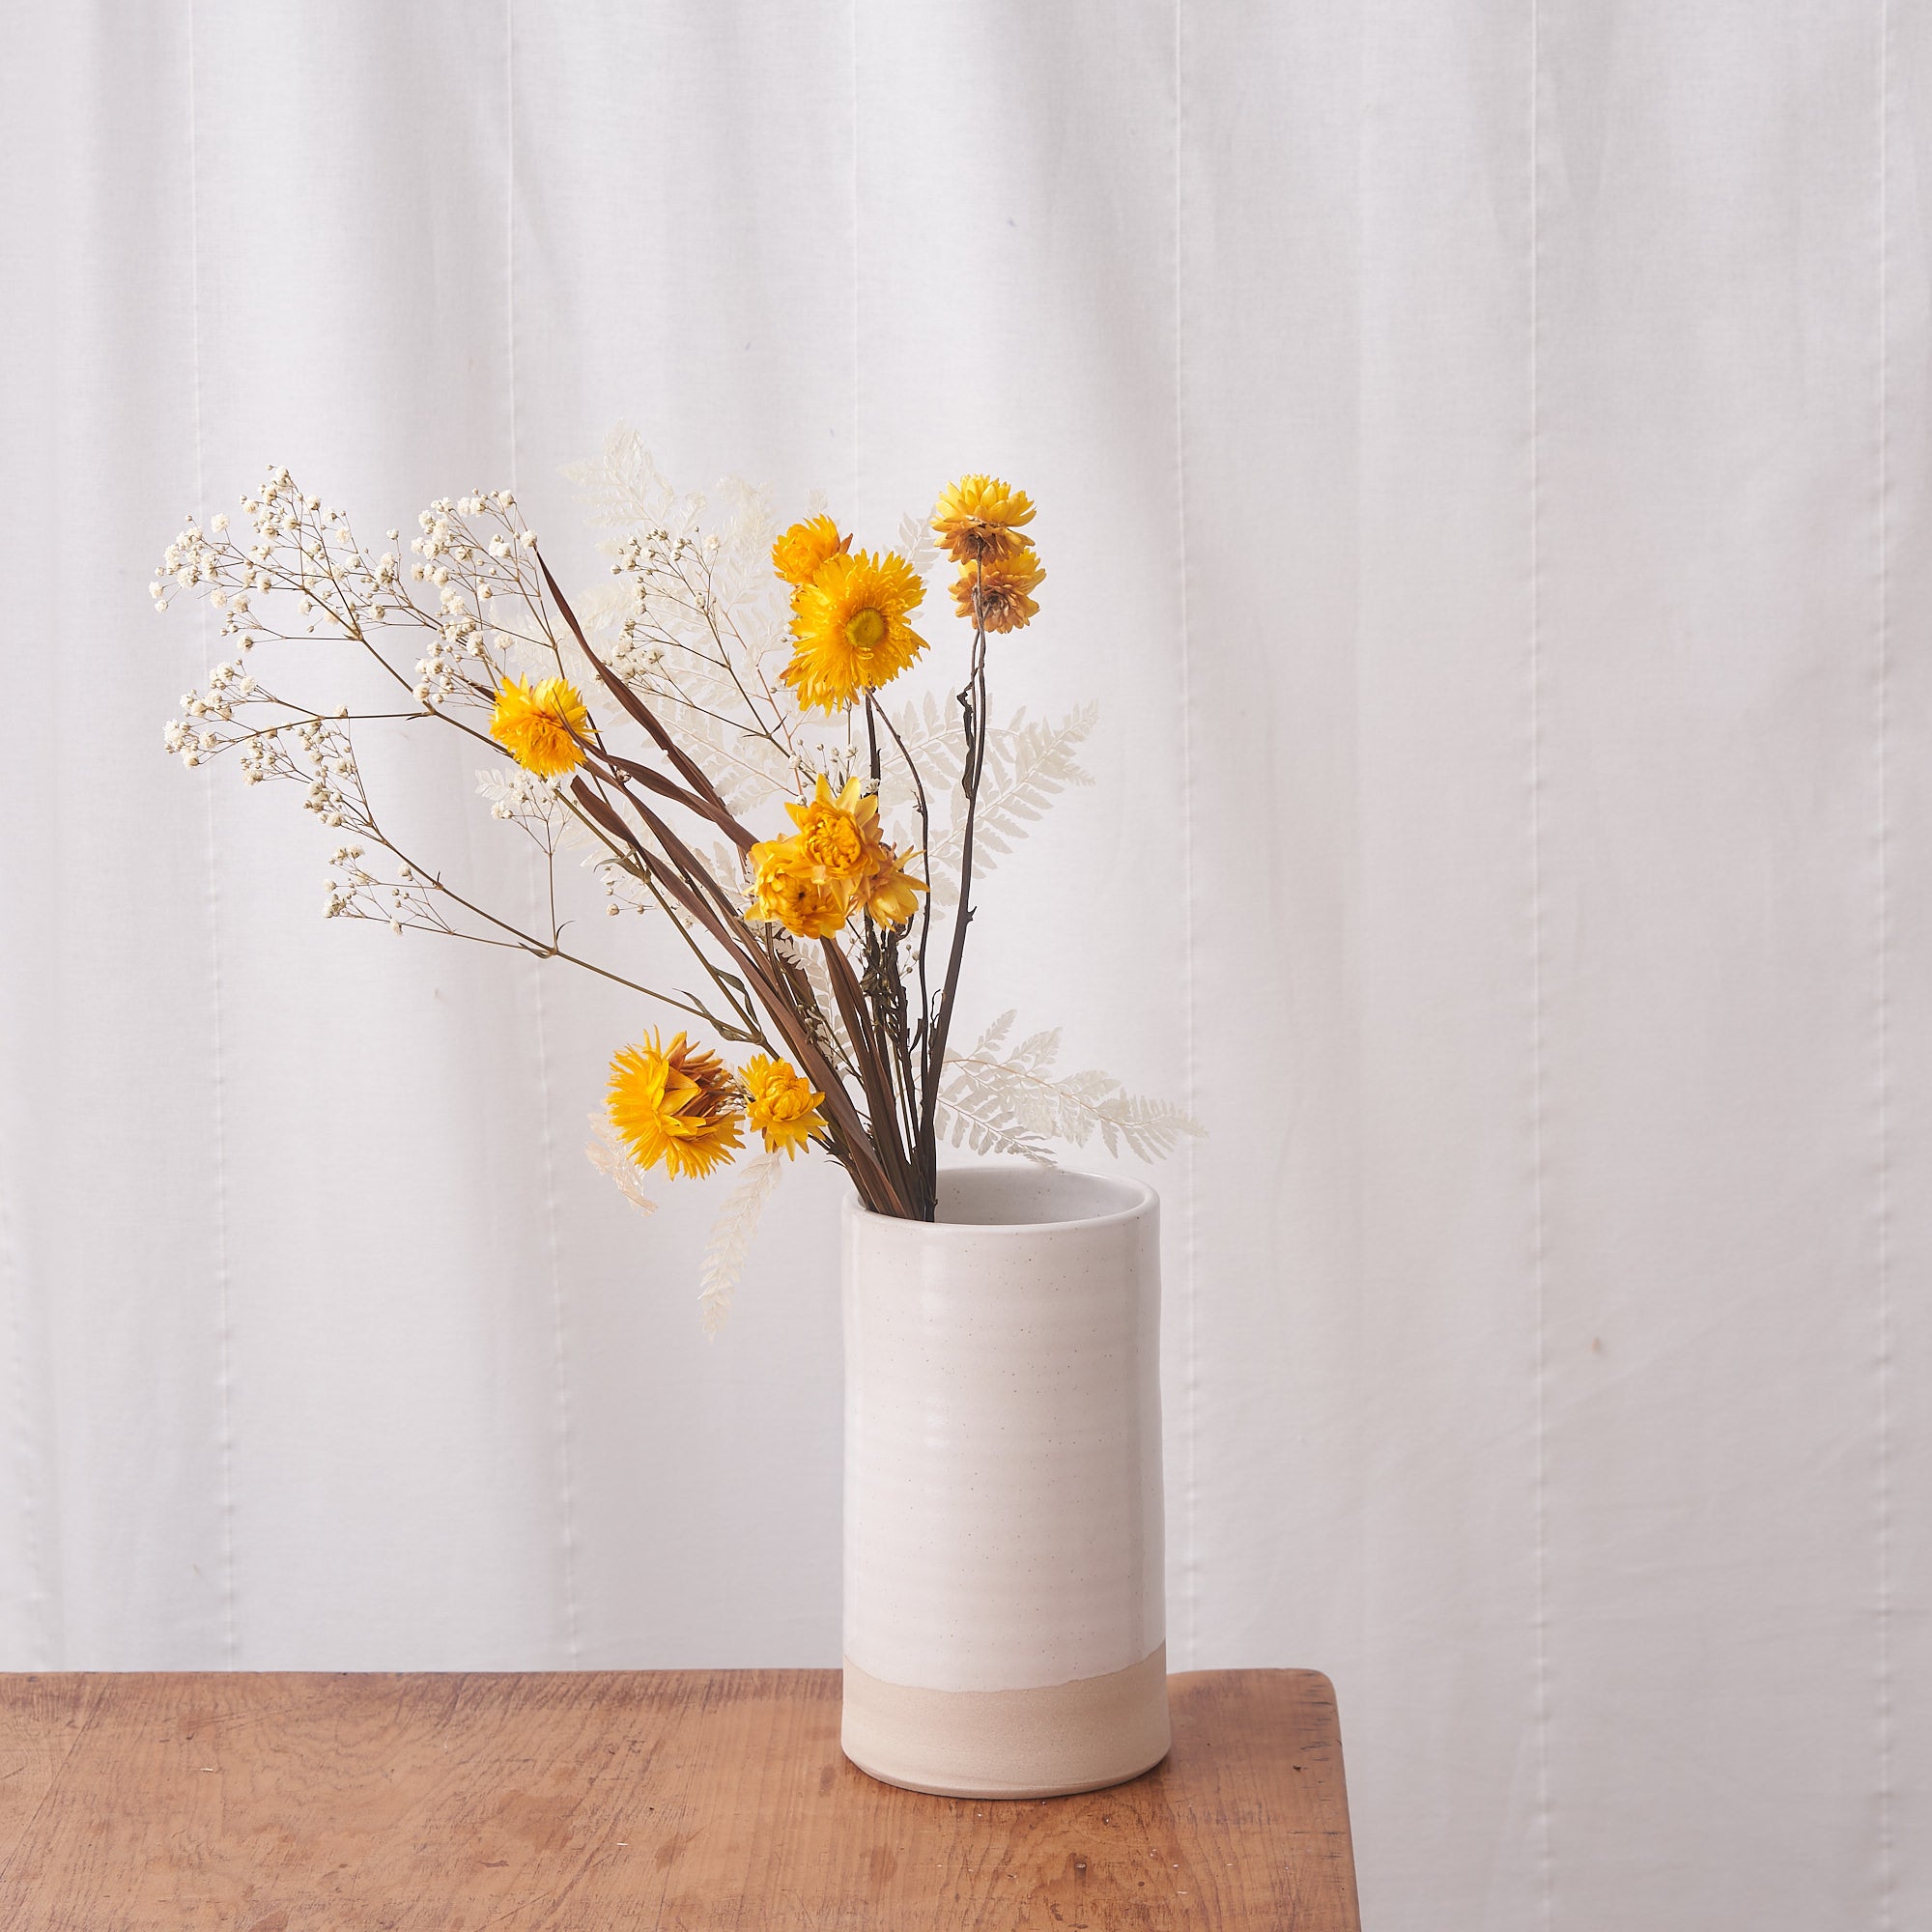 Sun Beam: bleached fern, white gyp and yellow straw flower